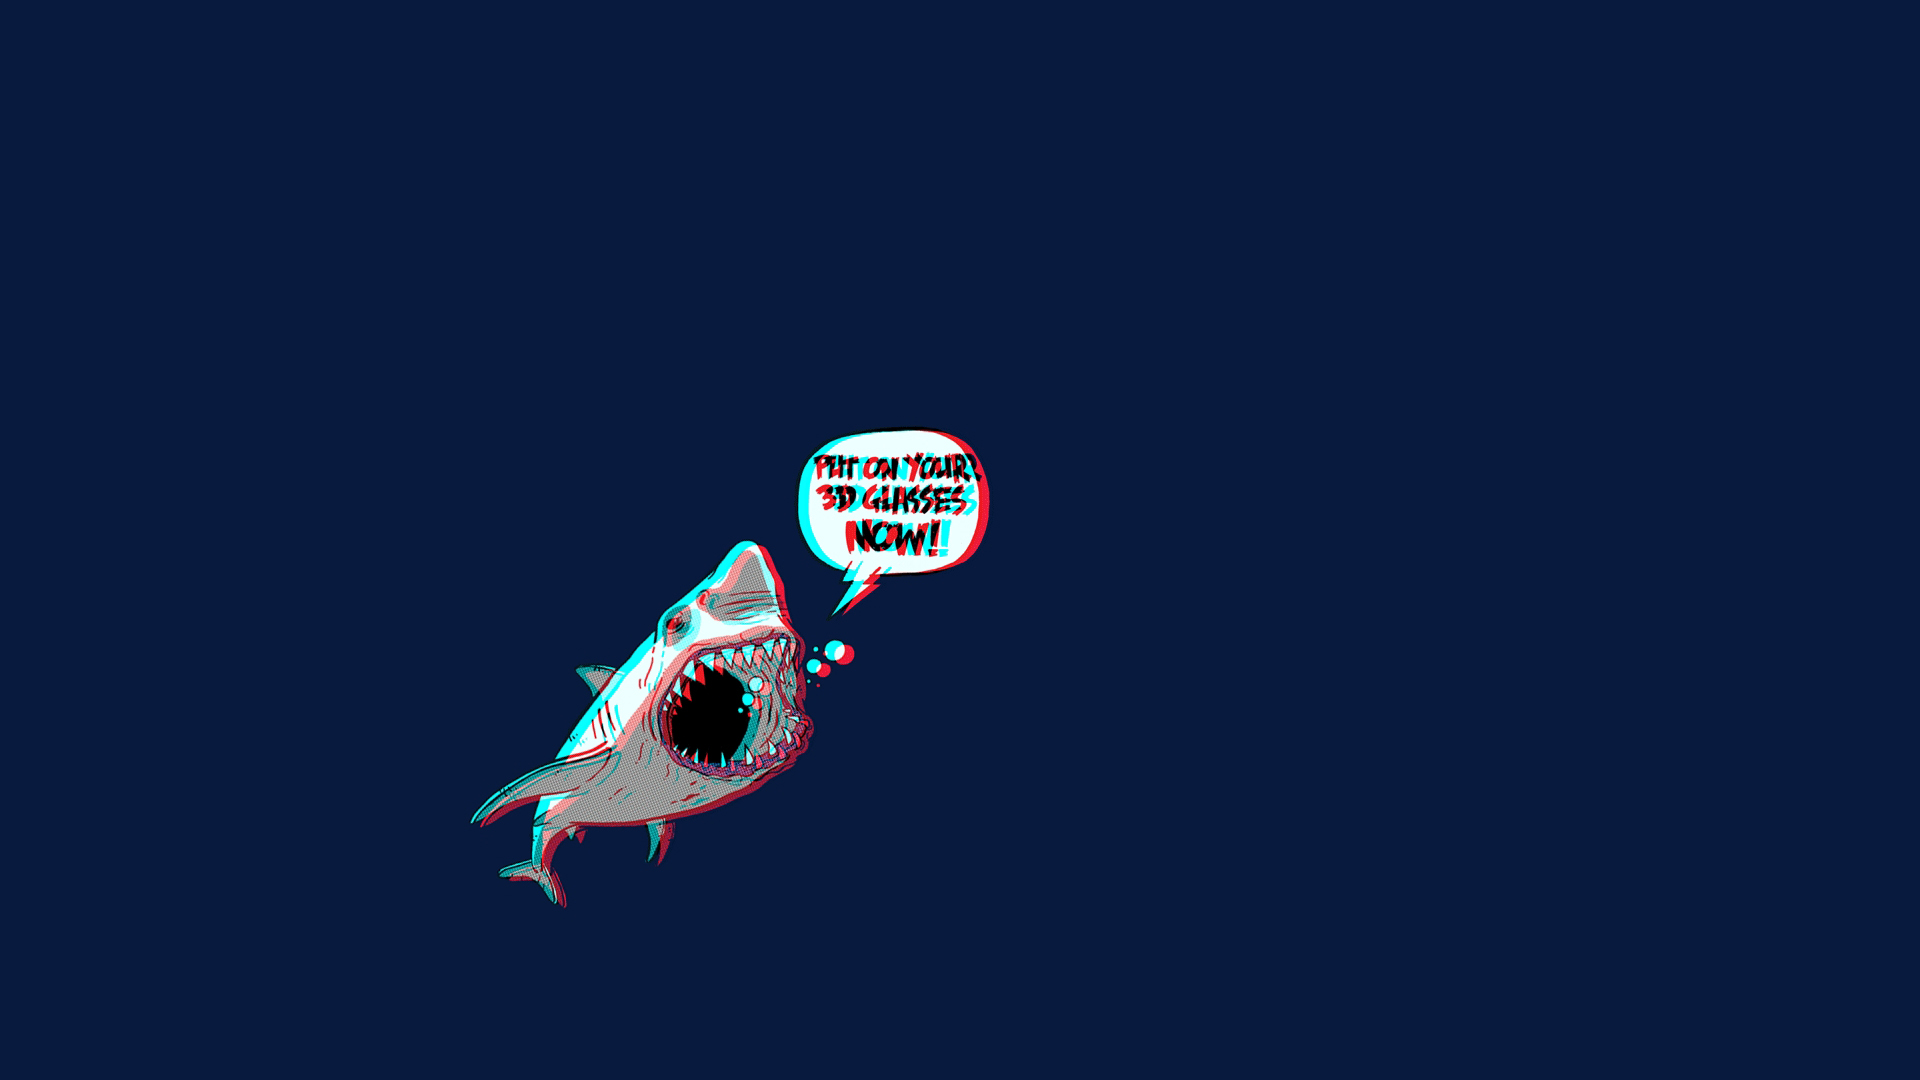 3d, trippy, artistic, psychedelic, shark